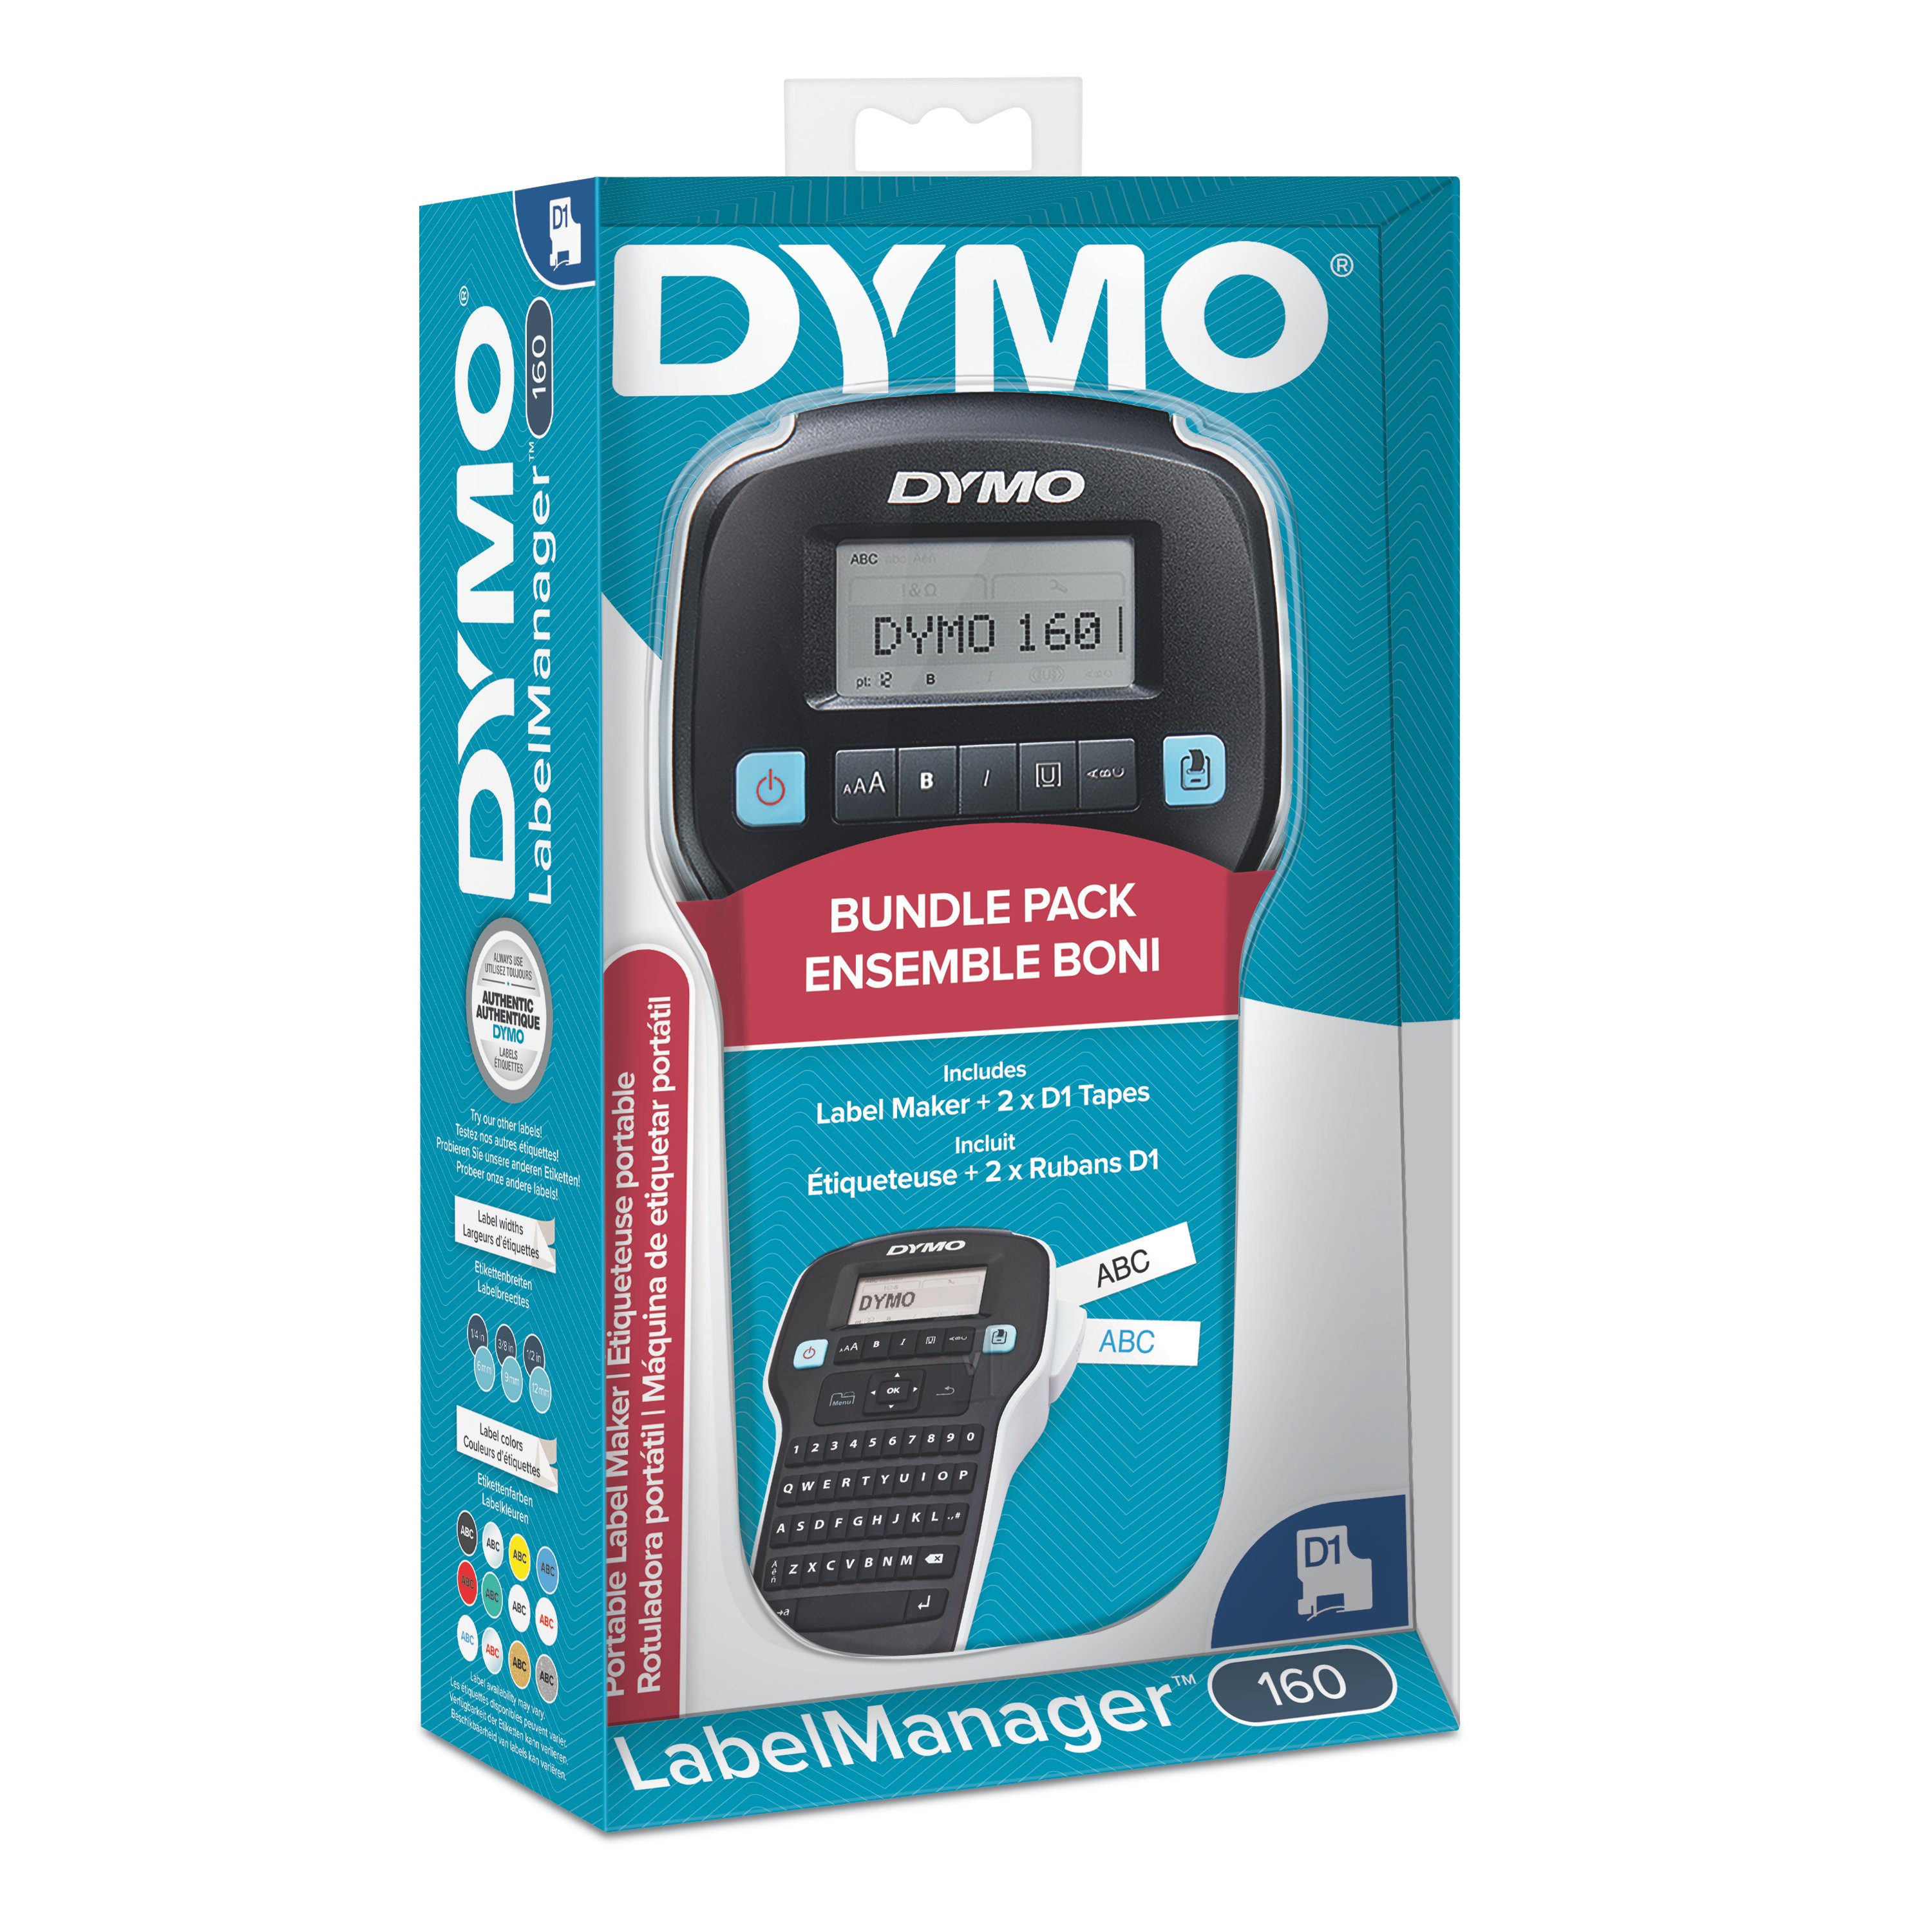 DYMO LabelManager 160 Keyboard Replacement - iFixit Repair Guide